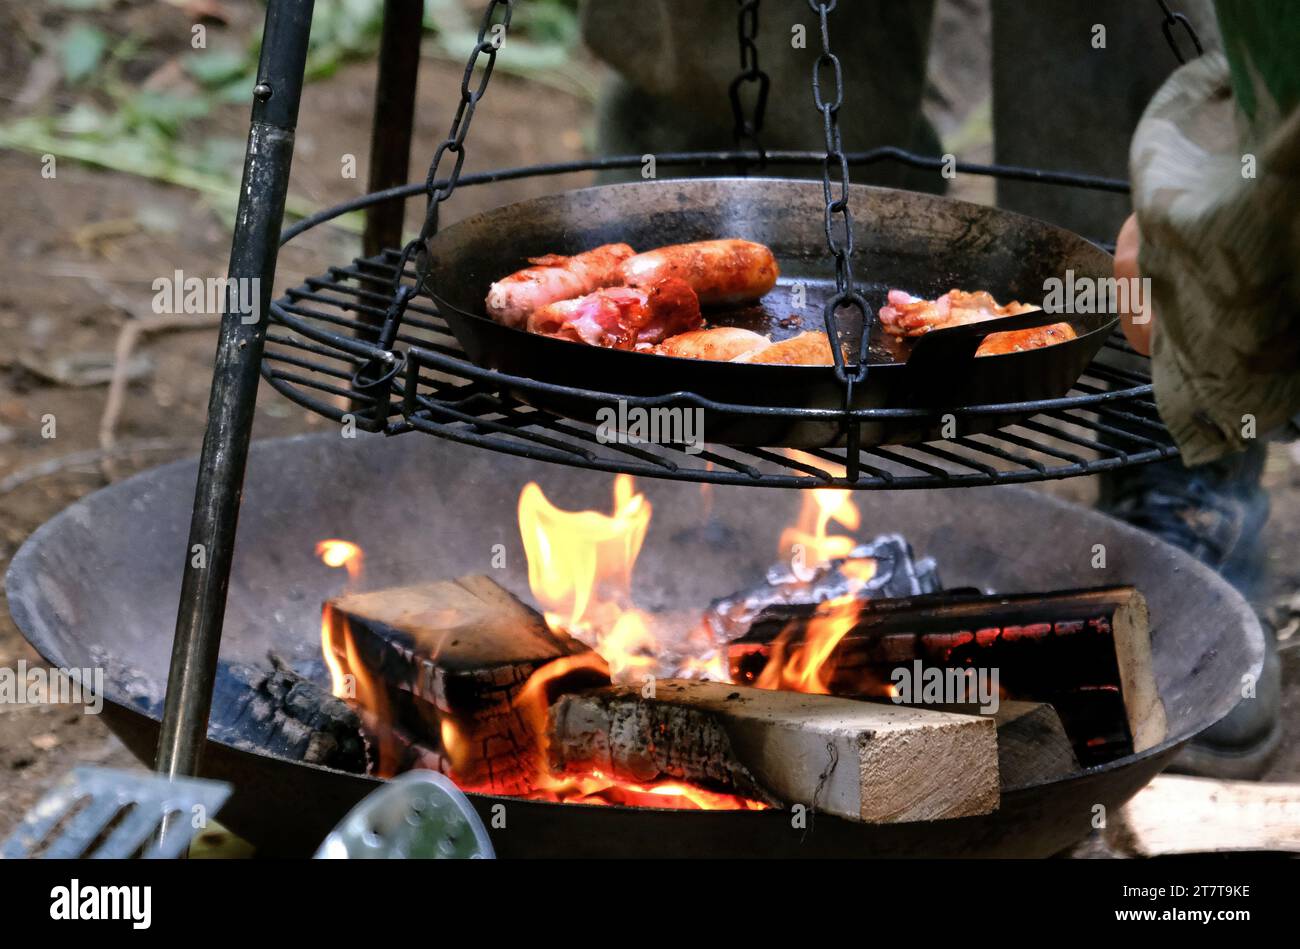 Breakfast cooking on outdoor fire. Stock Photo